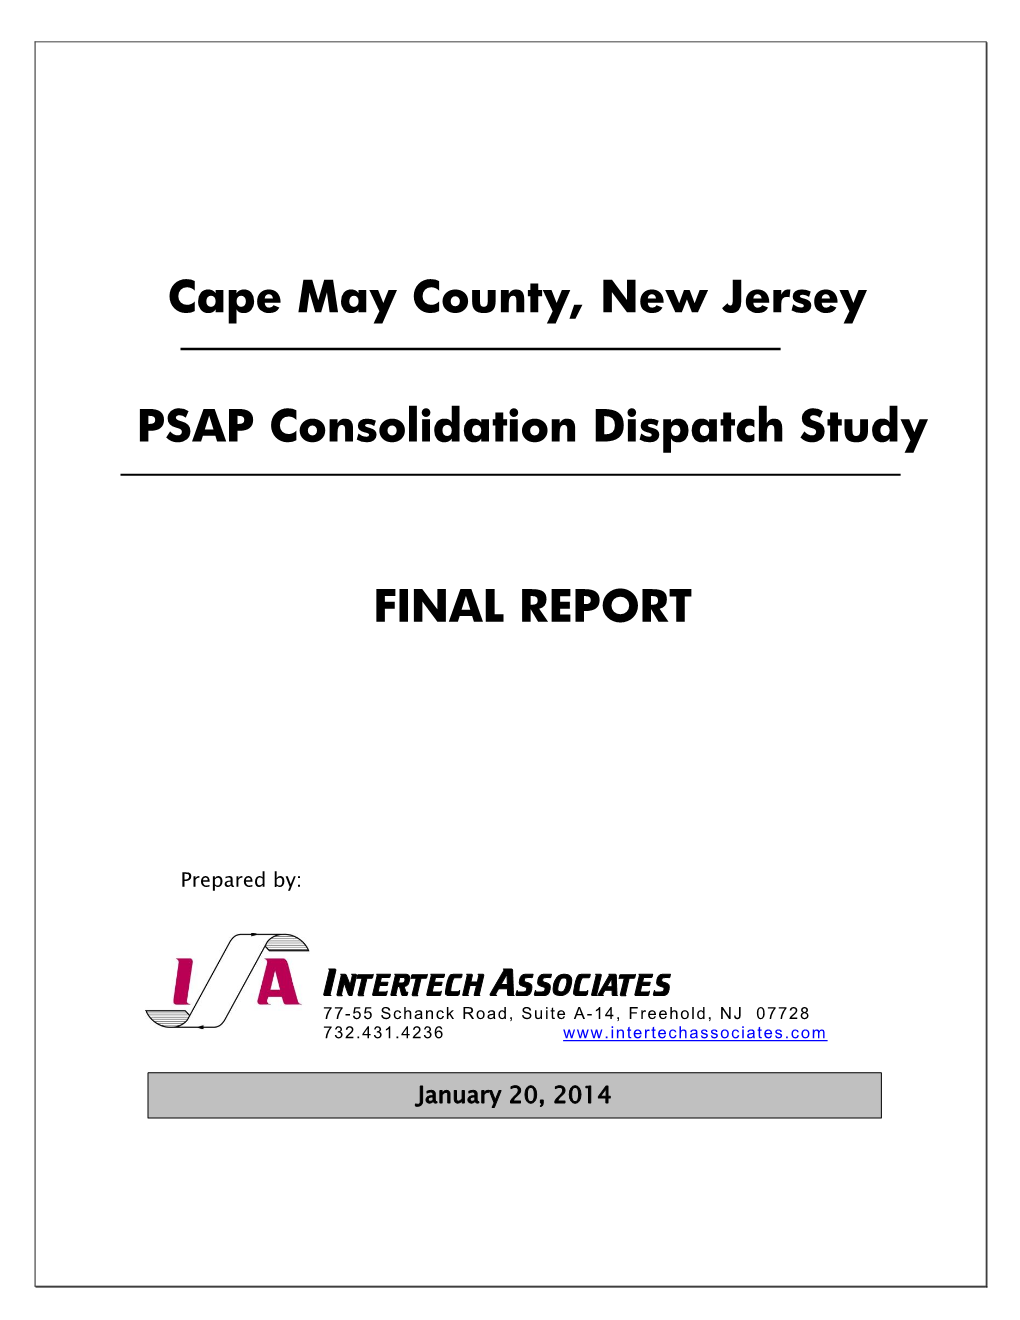 Cape May County, New Jersey PSAP Consolidation Dispatch Study